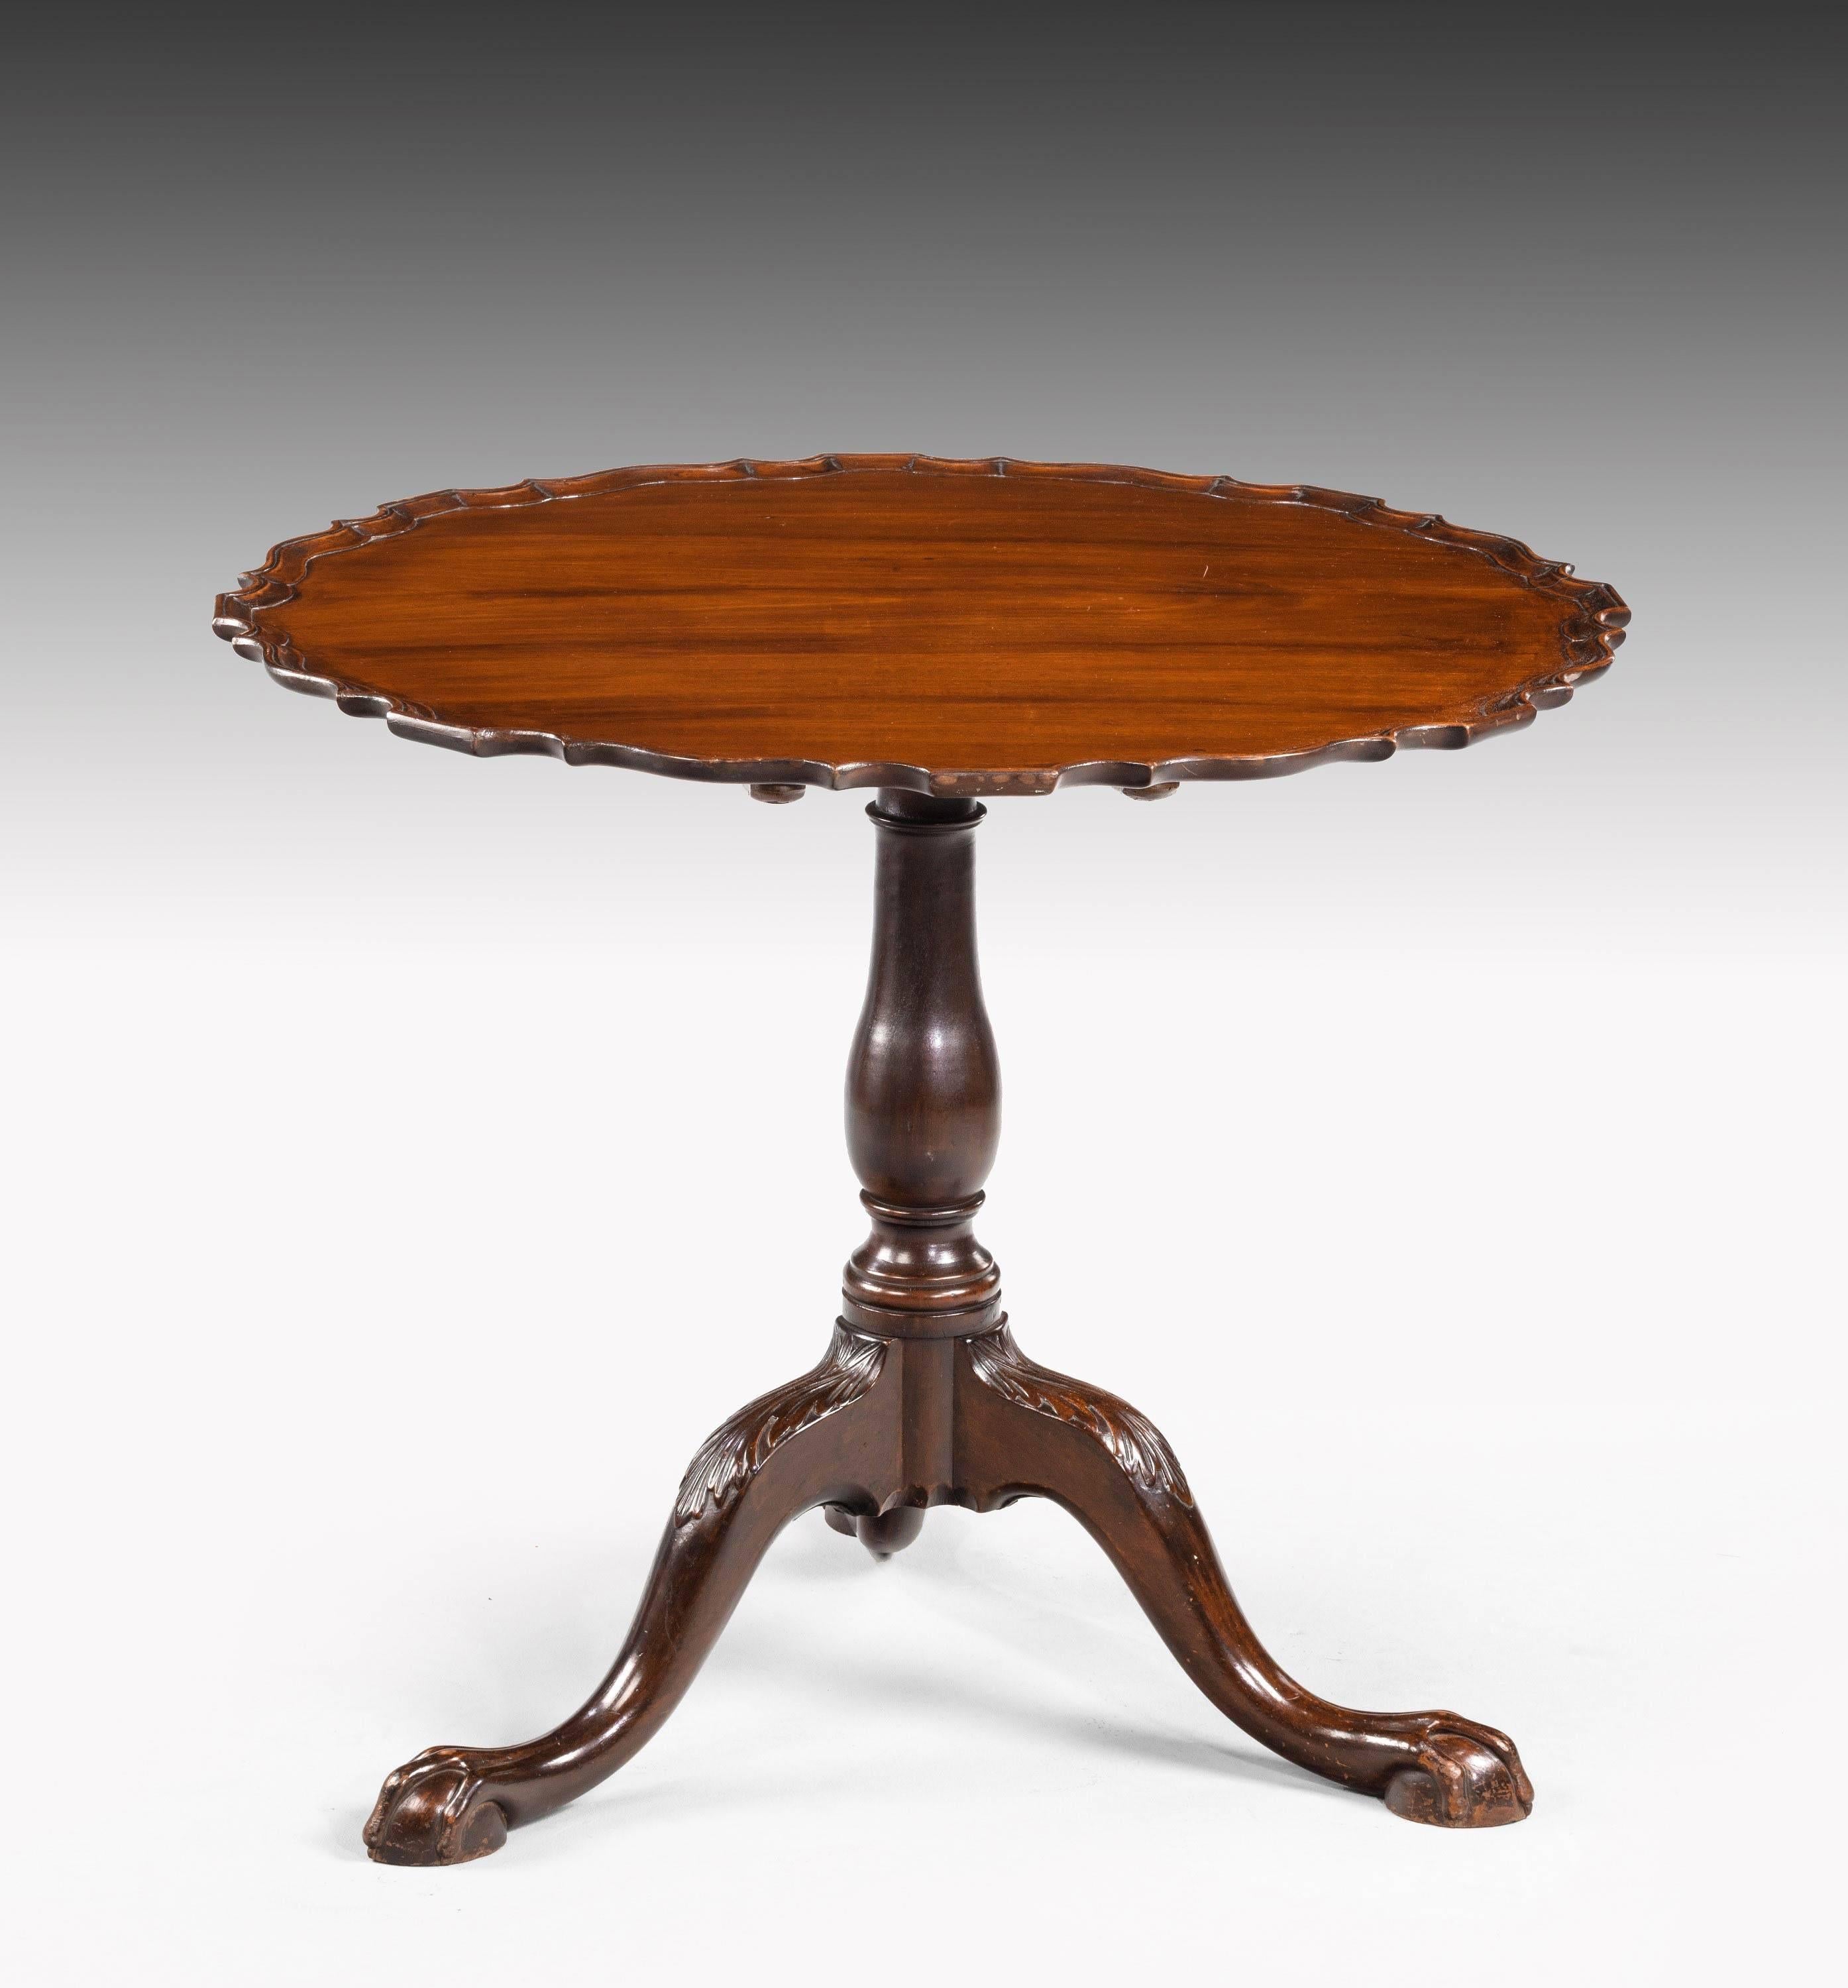 English Finely Carved Chippendale Style Mahogany Pie-Crust Tilt Table